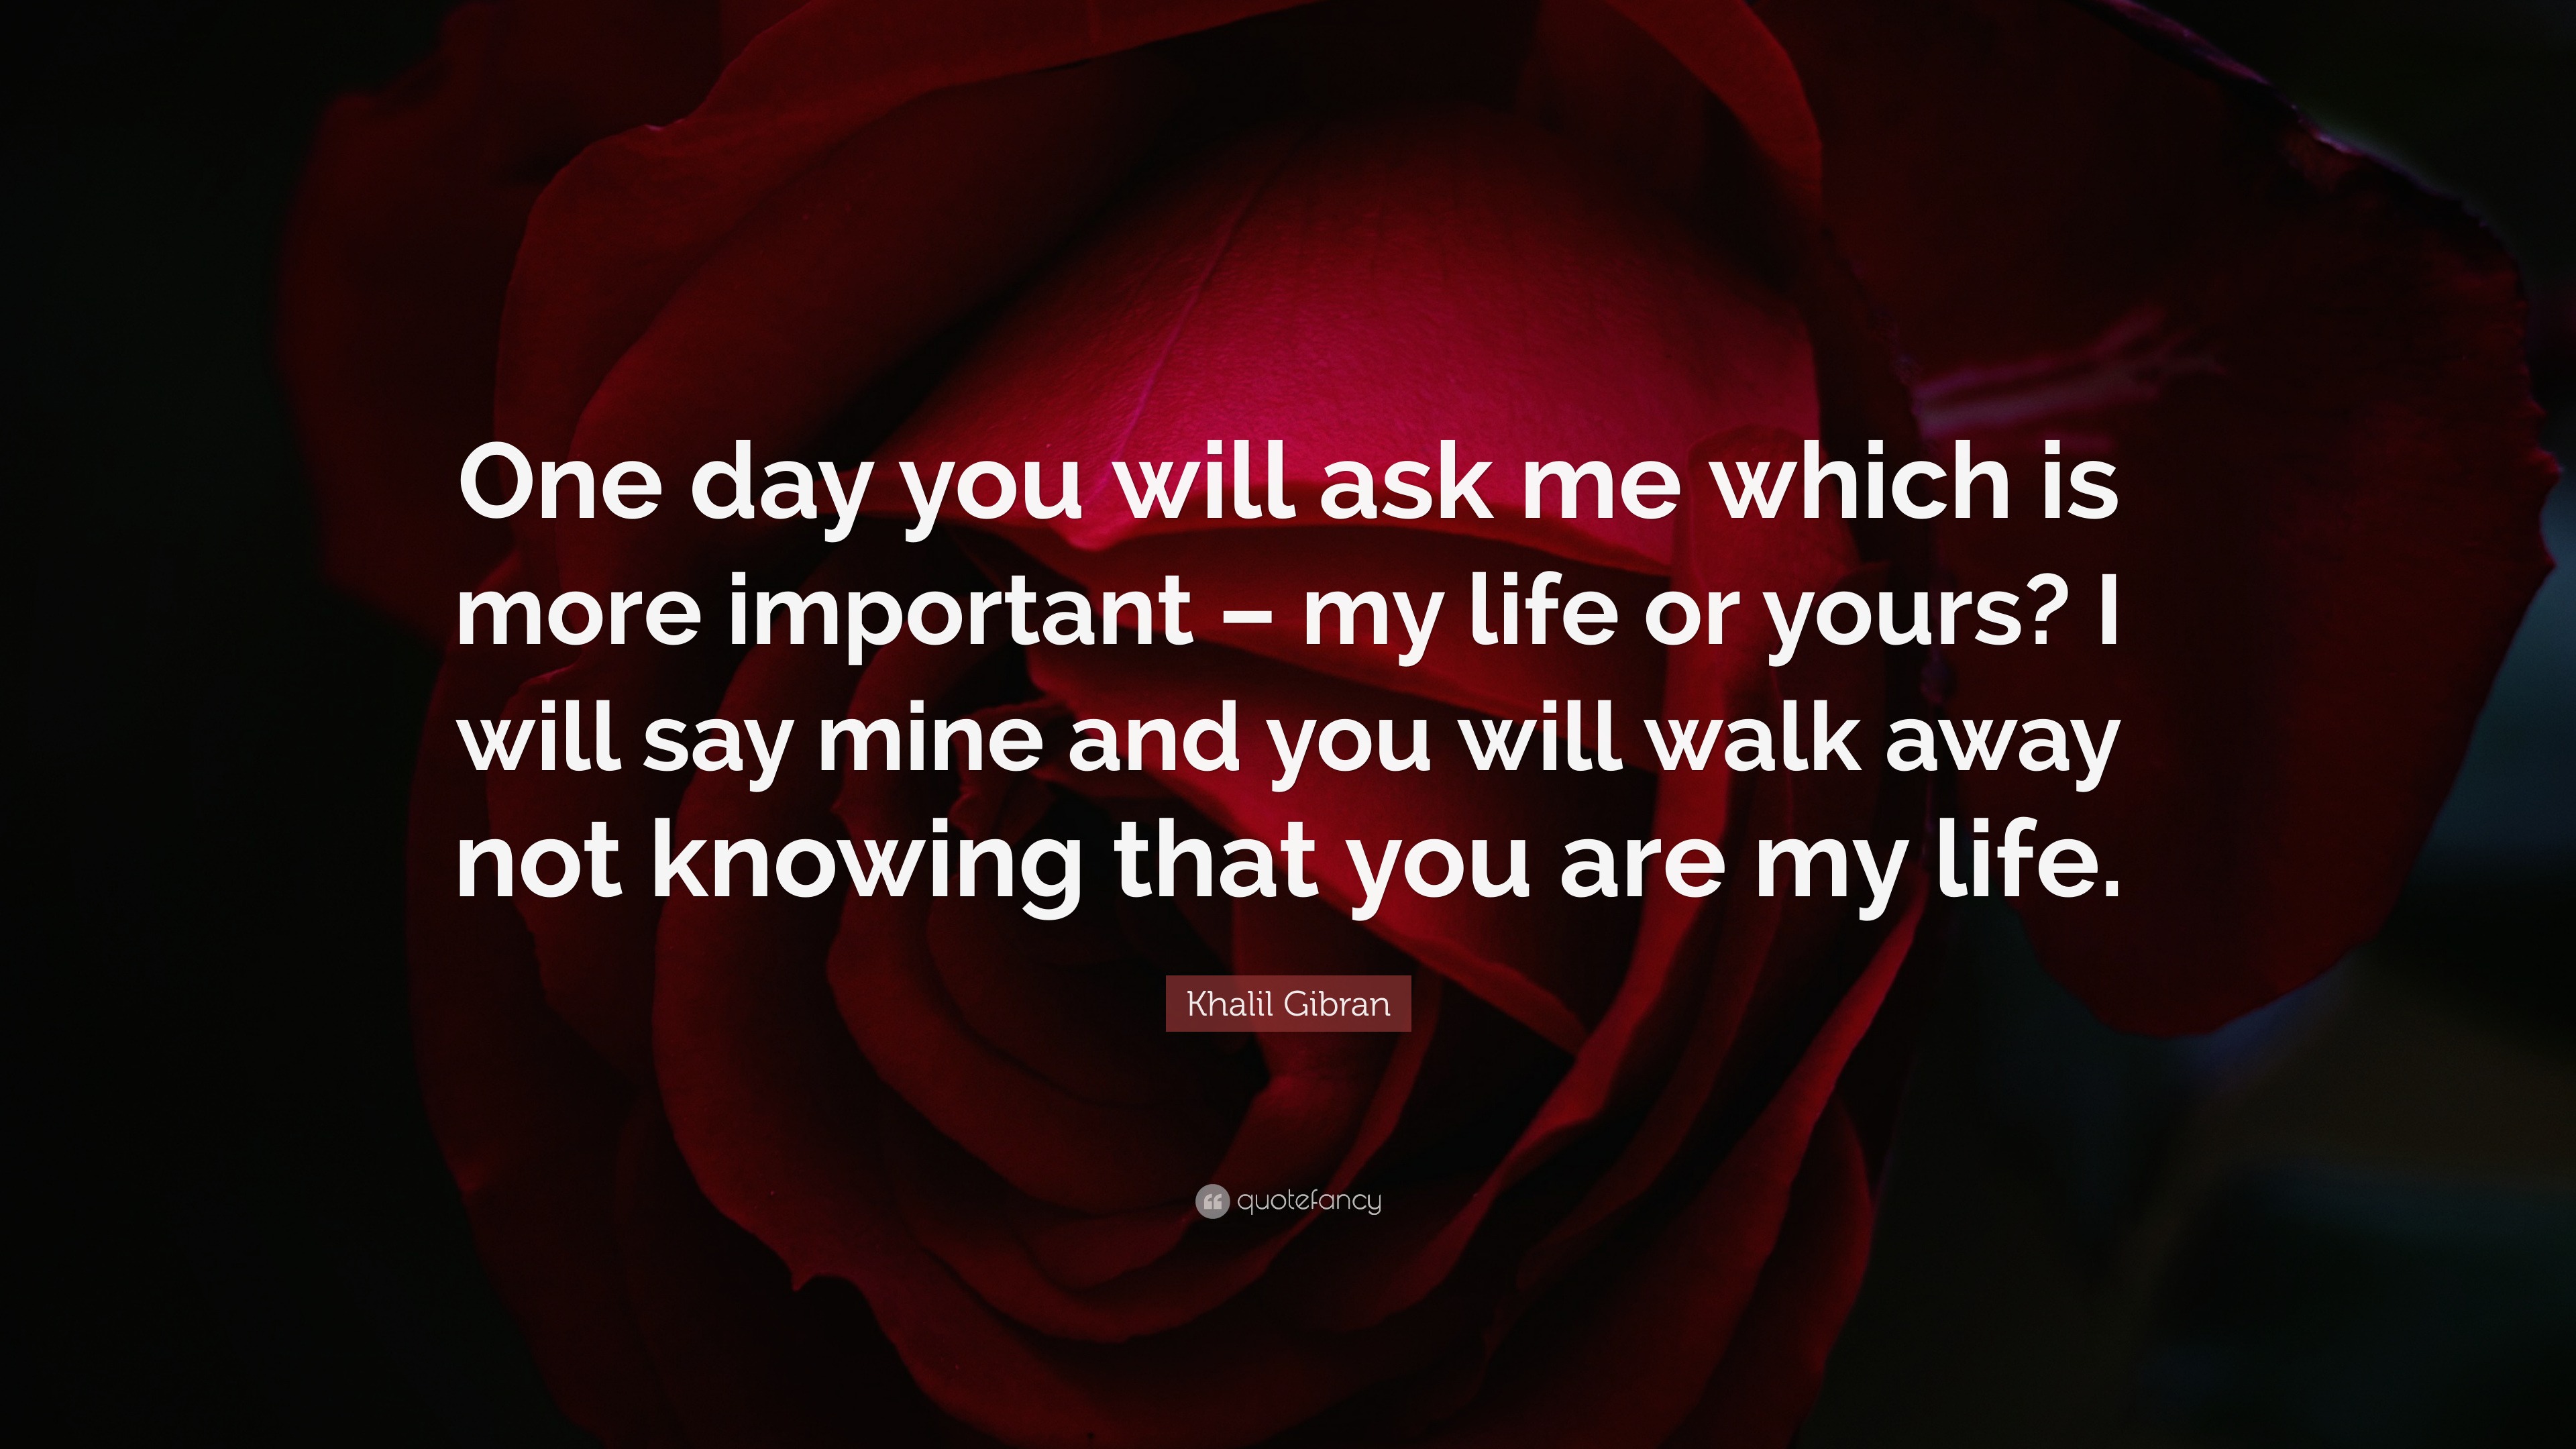 Khalil Gibran Quote: “One Day You Will Ask Me Which Is More Important – My Life Or Yours? I Will Say Mine And You Will Walk Away Not Knowing T...”